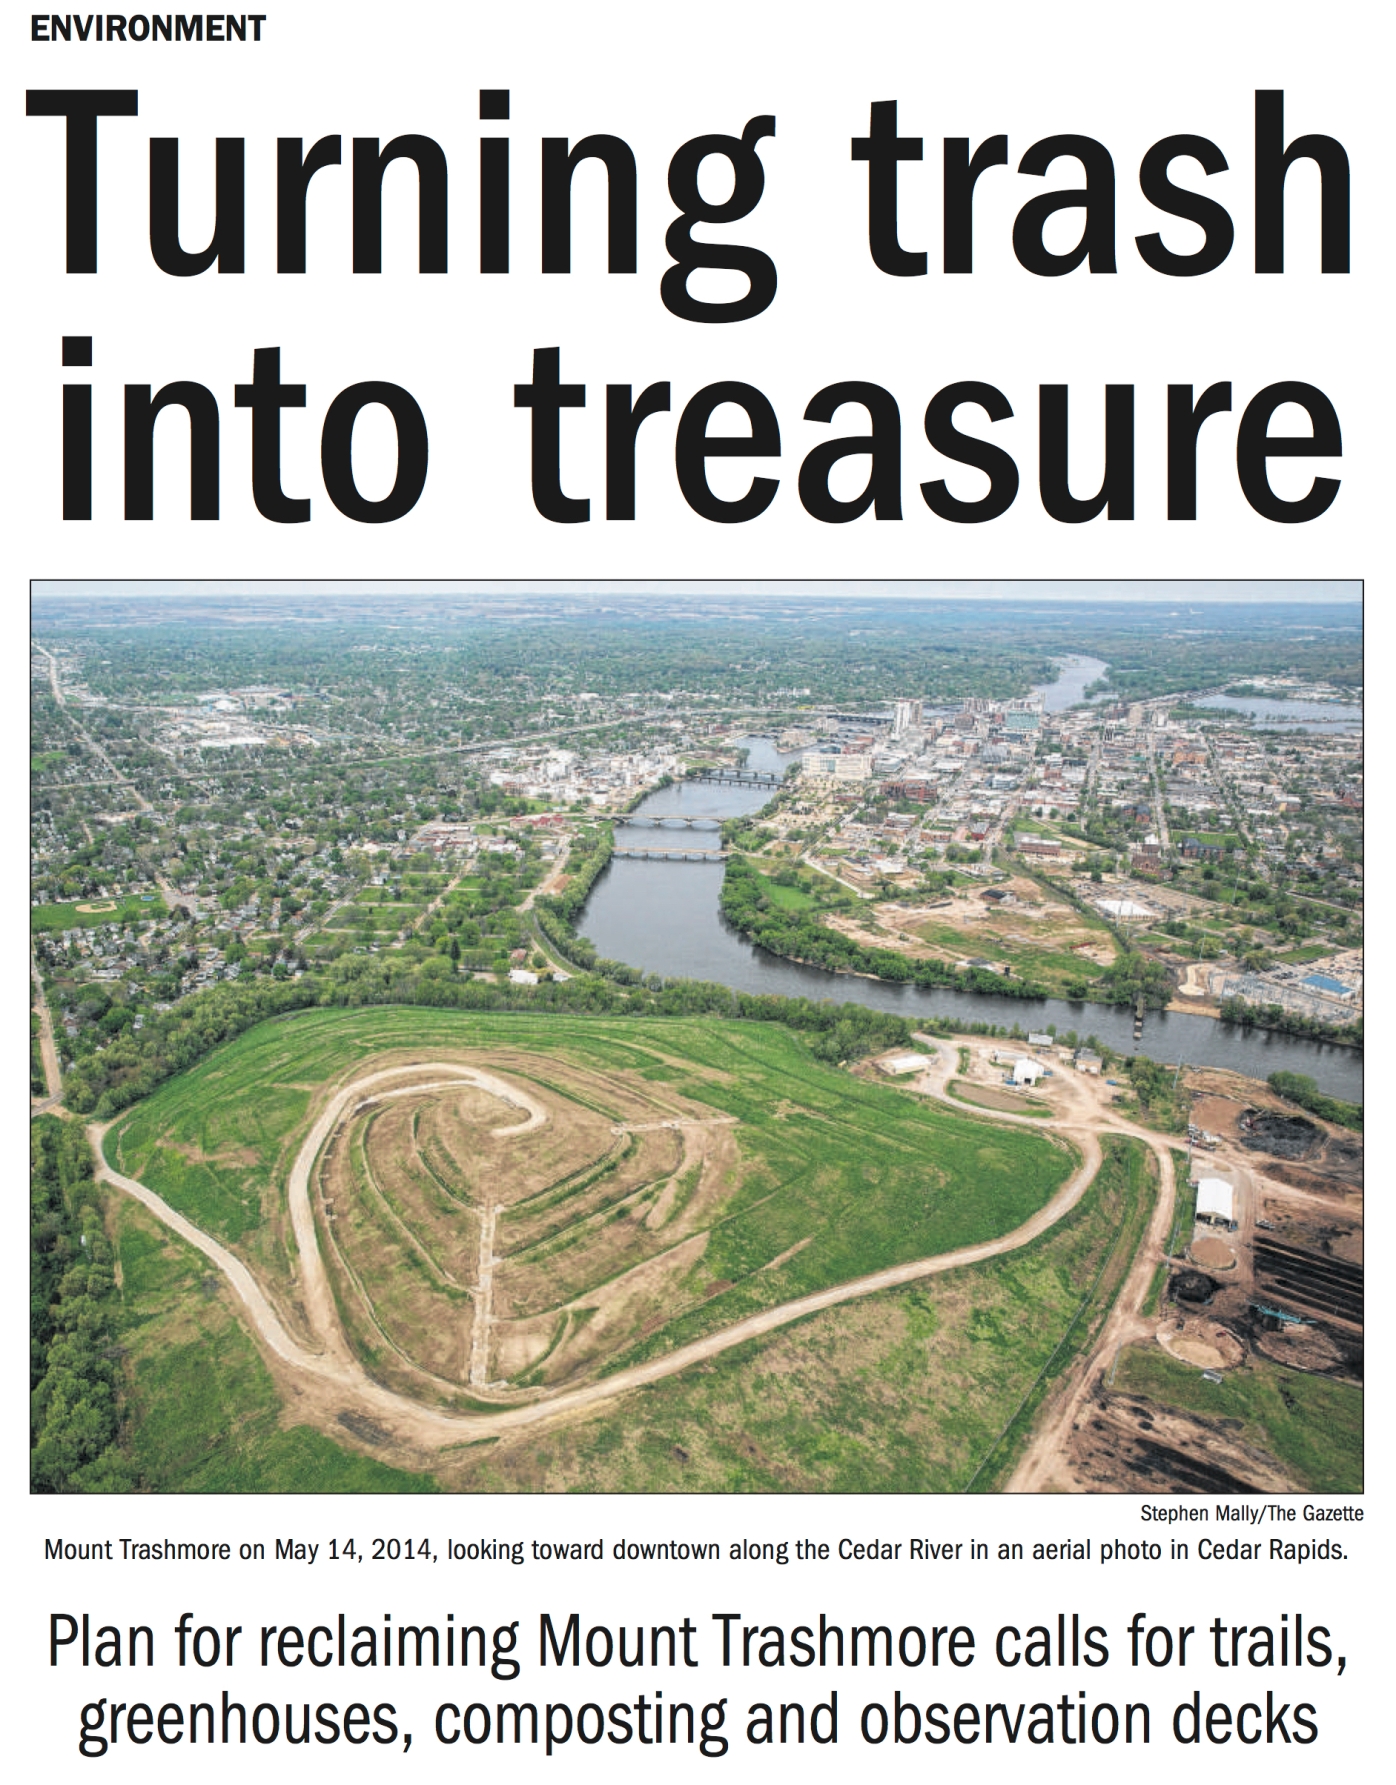 Cedar Rapids Gazette cover in 2014, with headline: Turning trash into treasure; Plan for reclaiming Mount Trashmore calls for trails, decks, greenhouses, composting, and observation decks, with an aerial photo of Mt. Trashmore and the Cedar River